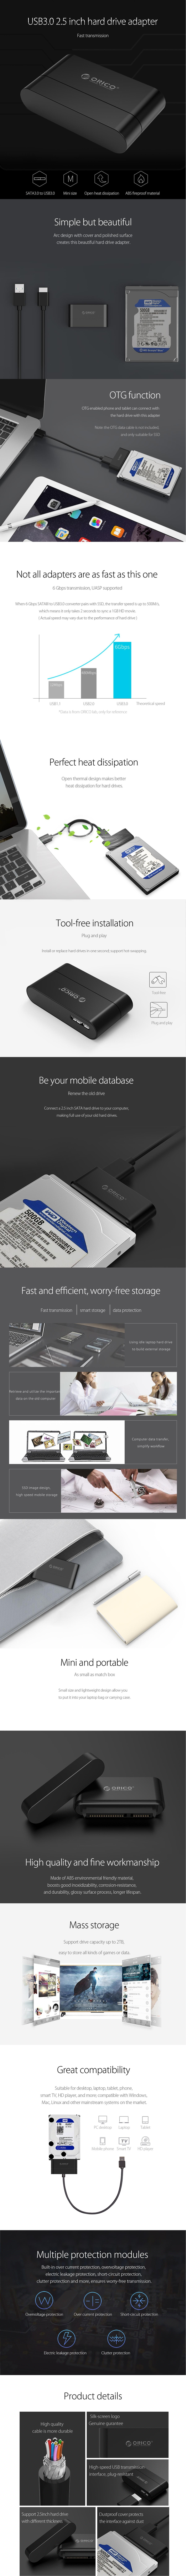 A large marketing image providing additional information about the product ORICO 2.5" USB 3.0 Hard Drive Adapter - Additional alt info not provided